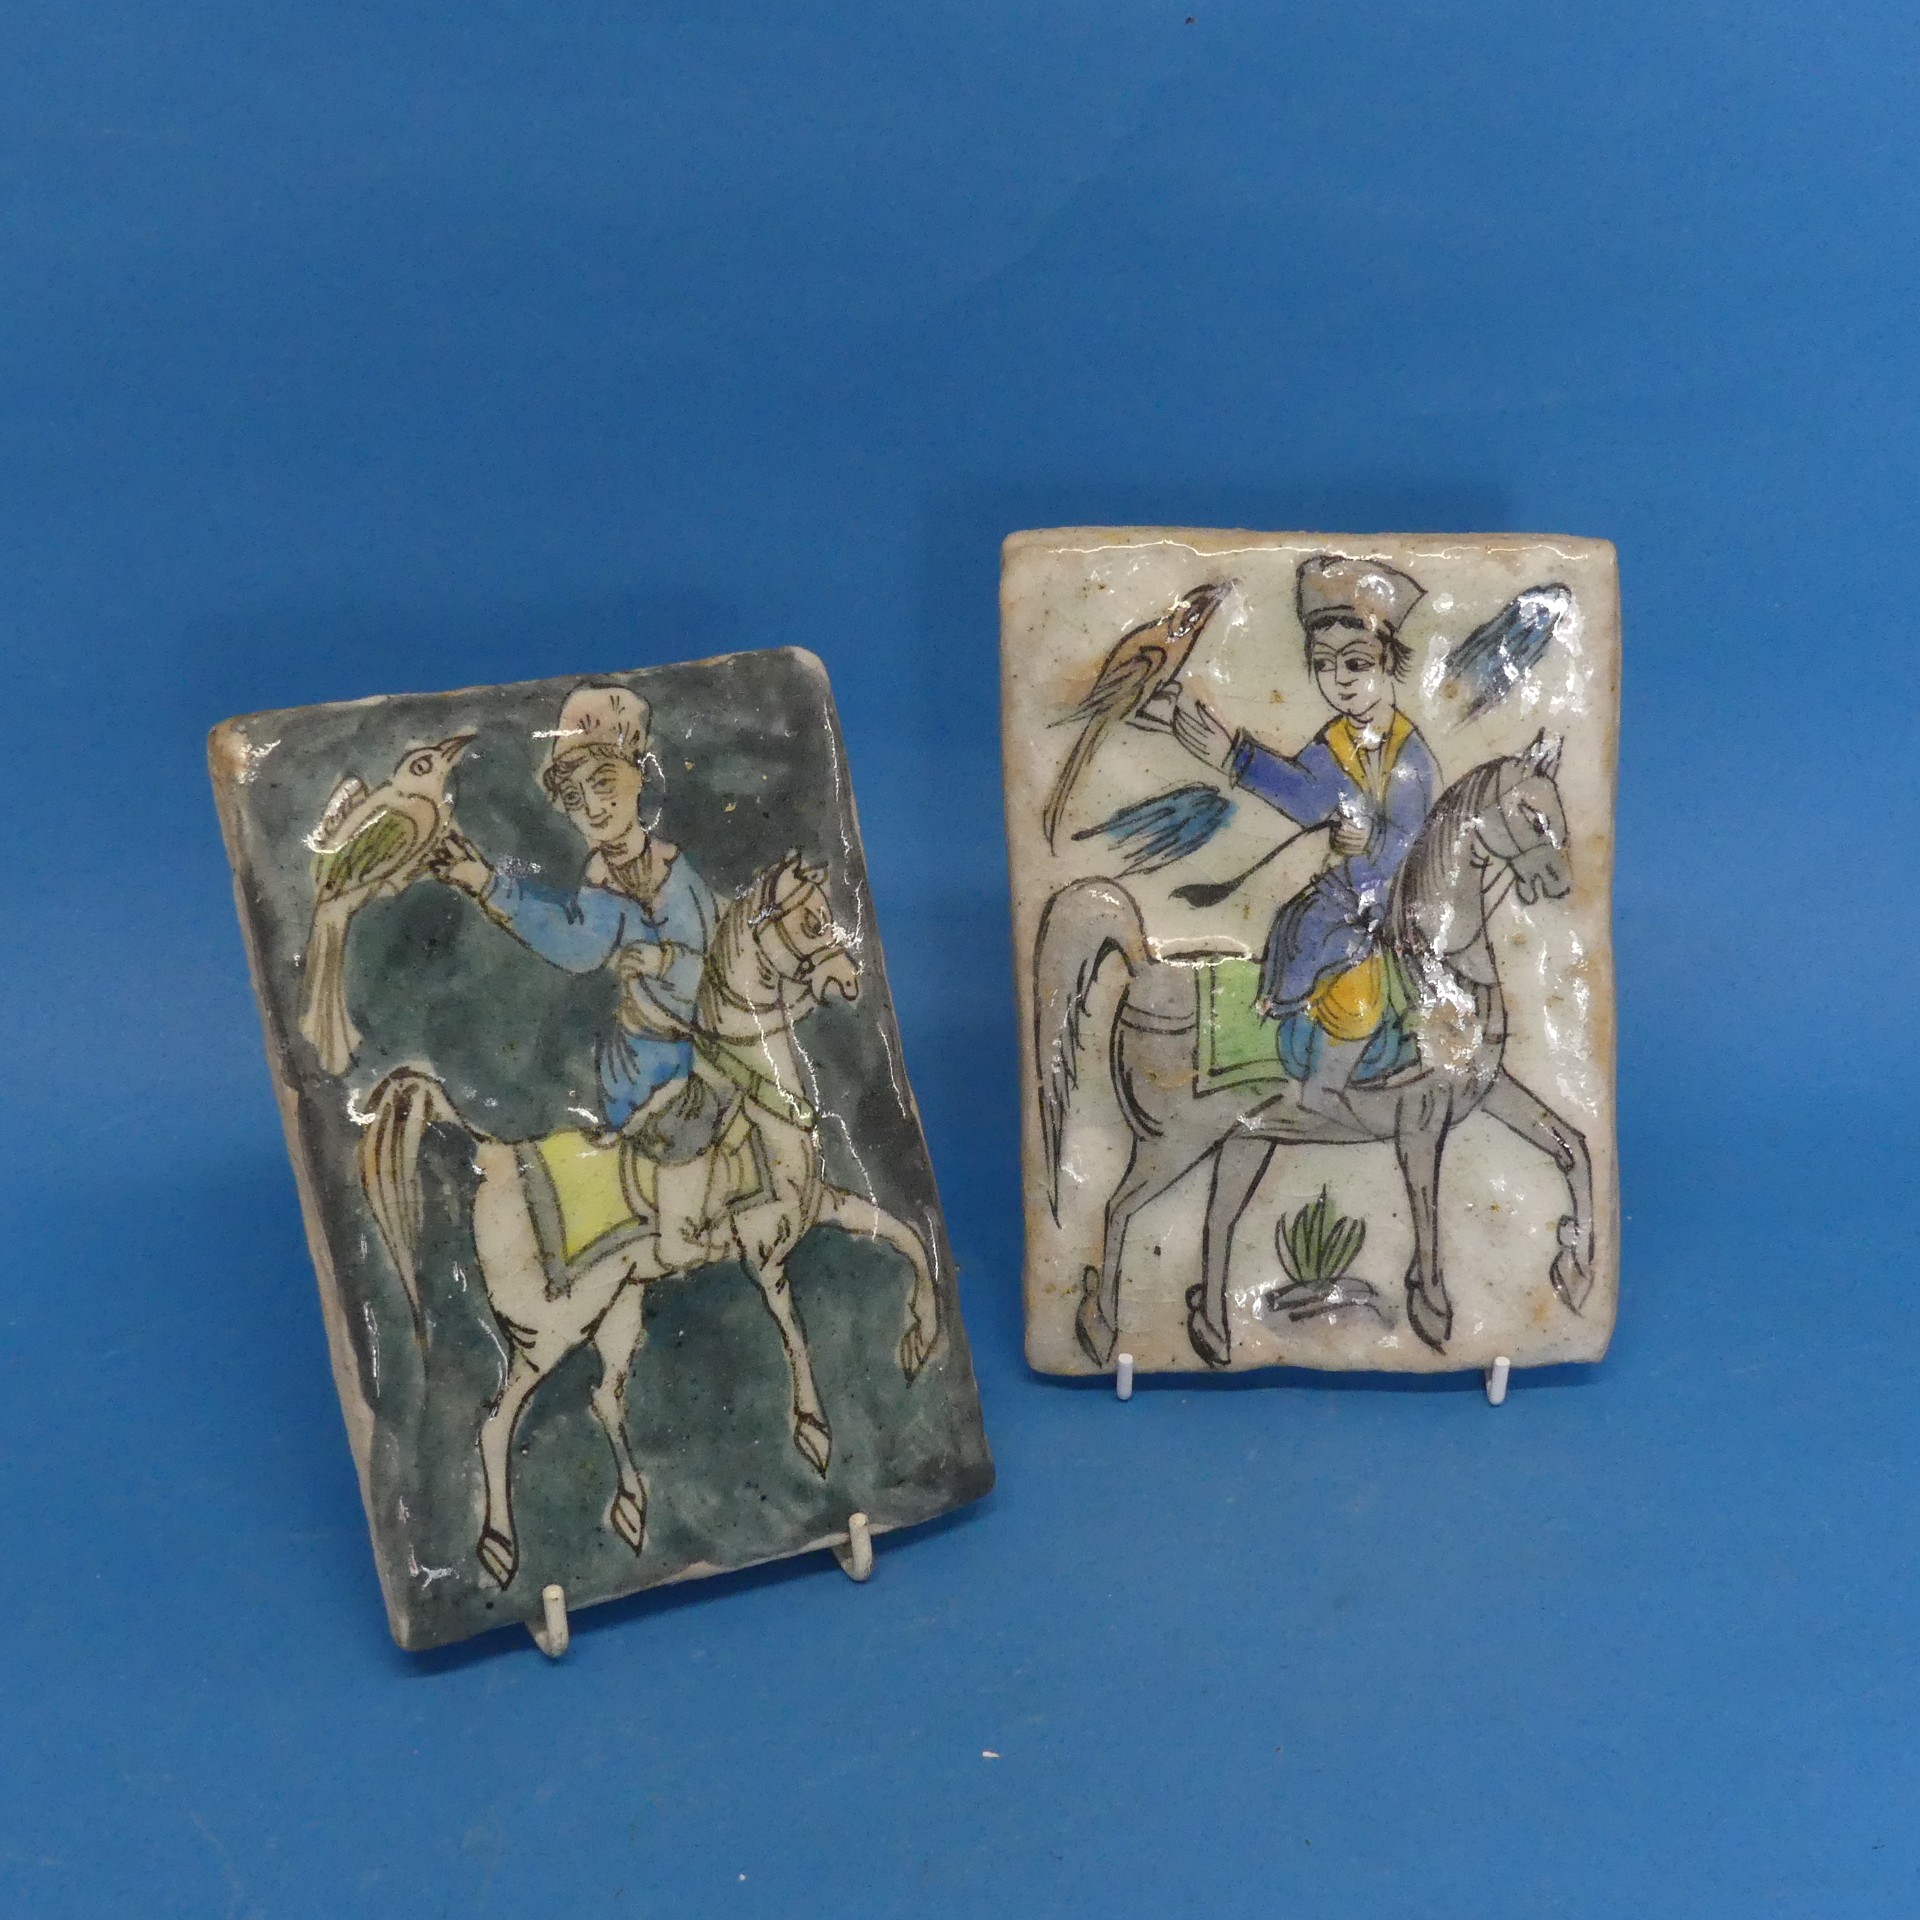 A pair of 19thC Persian Tiles, depicting a horse rider catching birds, somewhat in relief, 13cm x